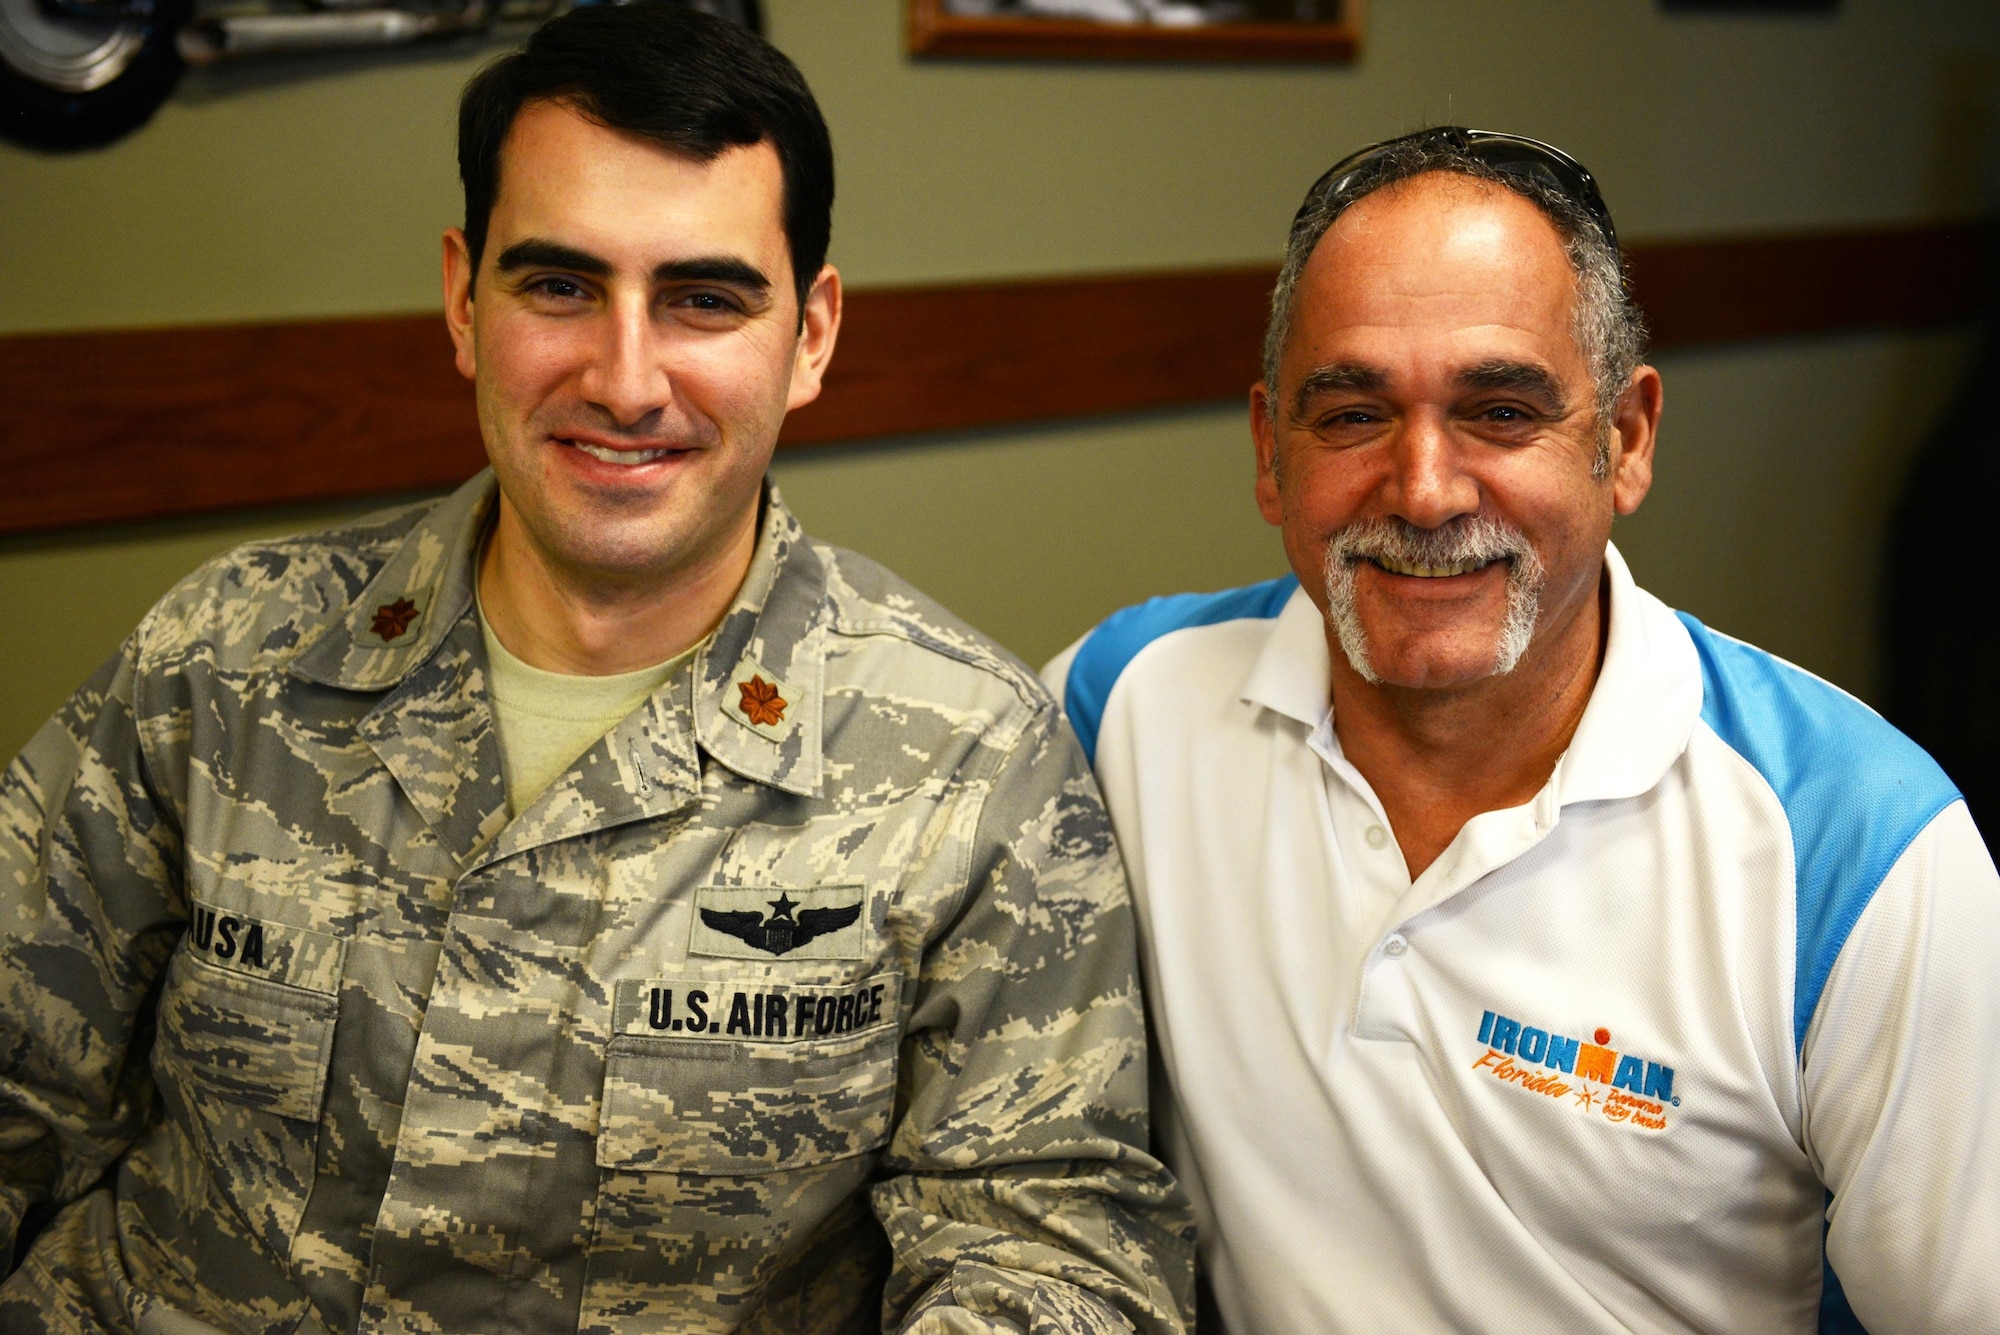 Maj. Stephen Rausa with retired Master Sgt. Ben Rausa during their first meeting since becoming pen pals 25 years ago on Jan. 25, 2016, at Hurlburt Field, Fla. (U.S. Air Force photo/Mike Raynor)